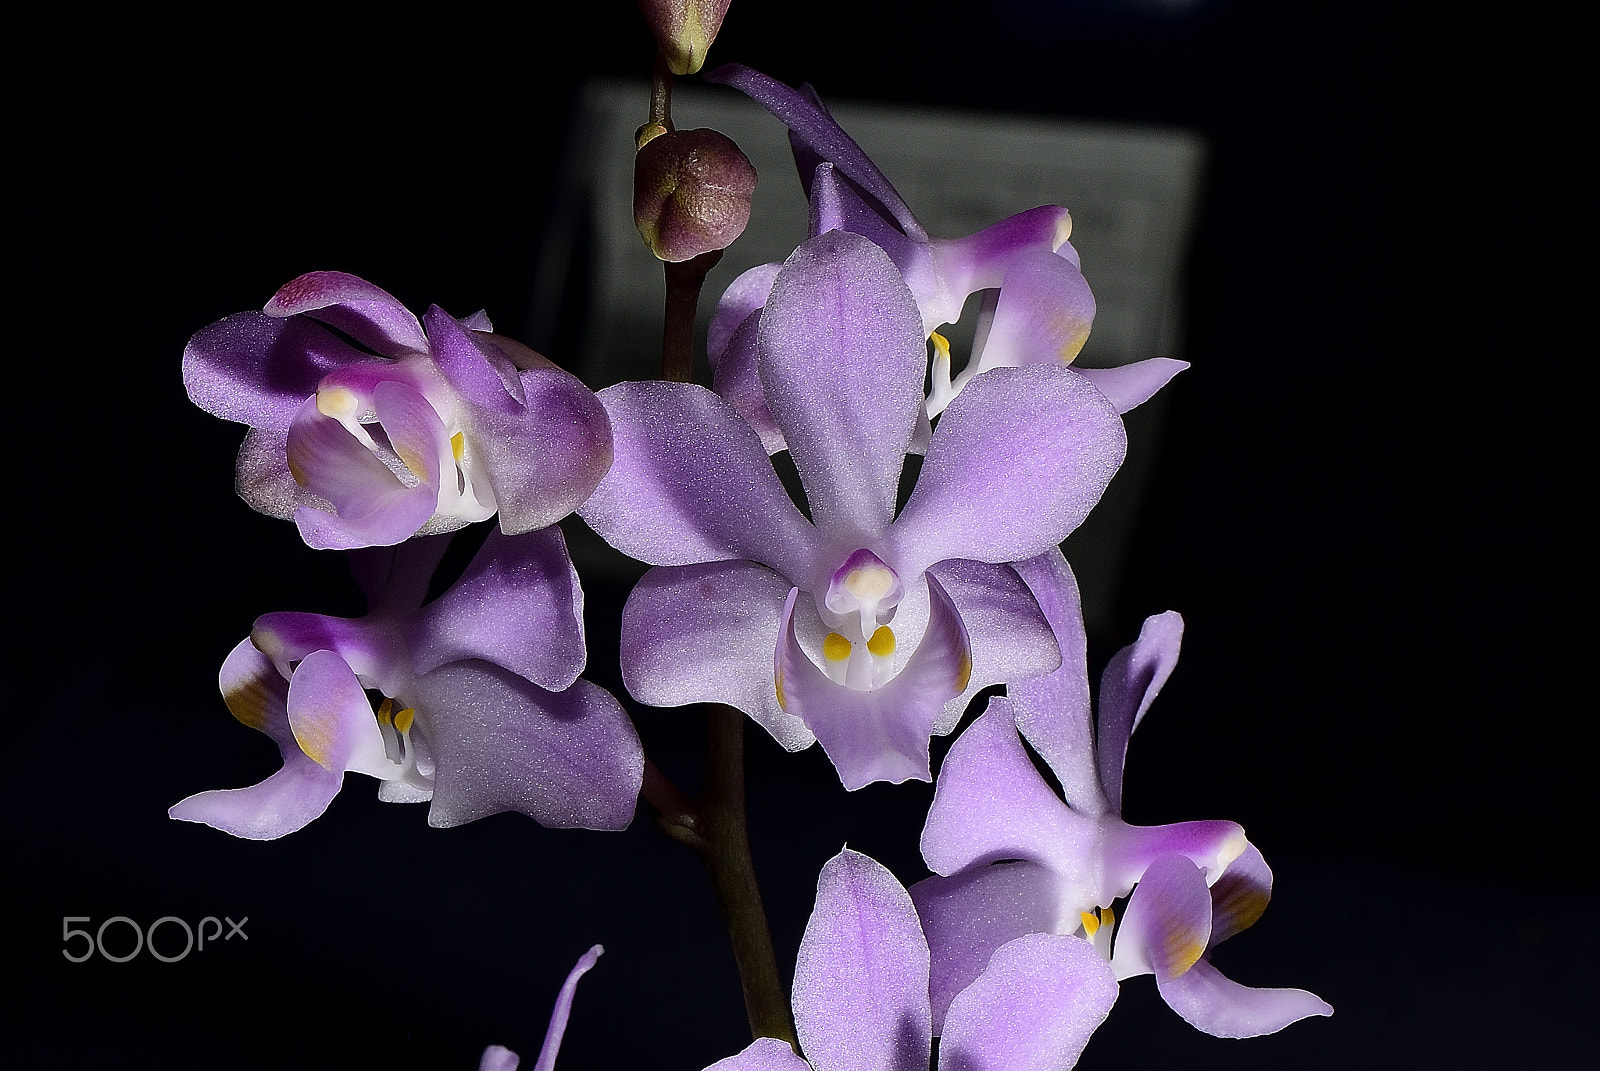 Nikon D200 sample photo. Orchid flower ~ kobe orcha exhibition神戸洋蘭展 ~23 photography